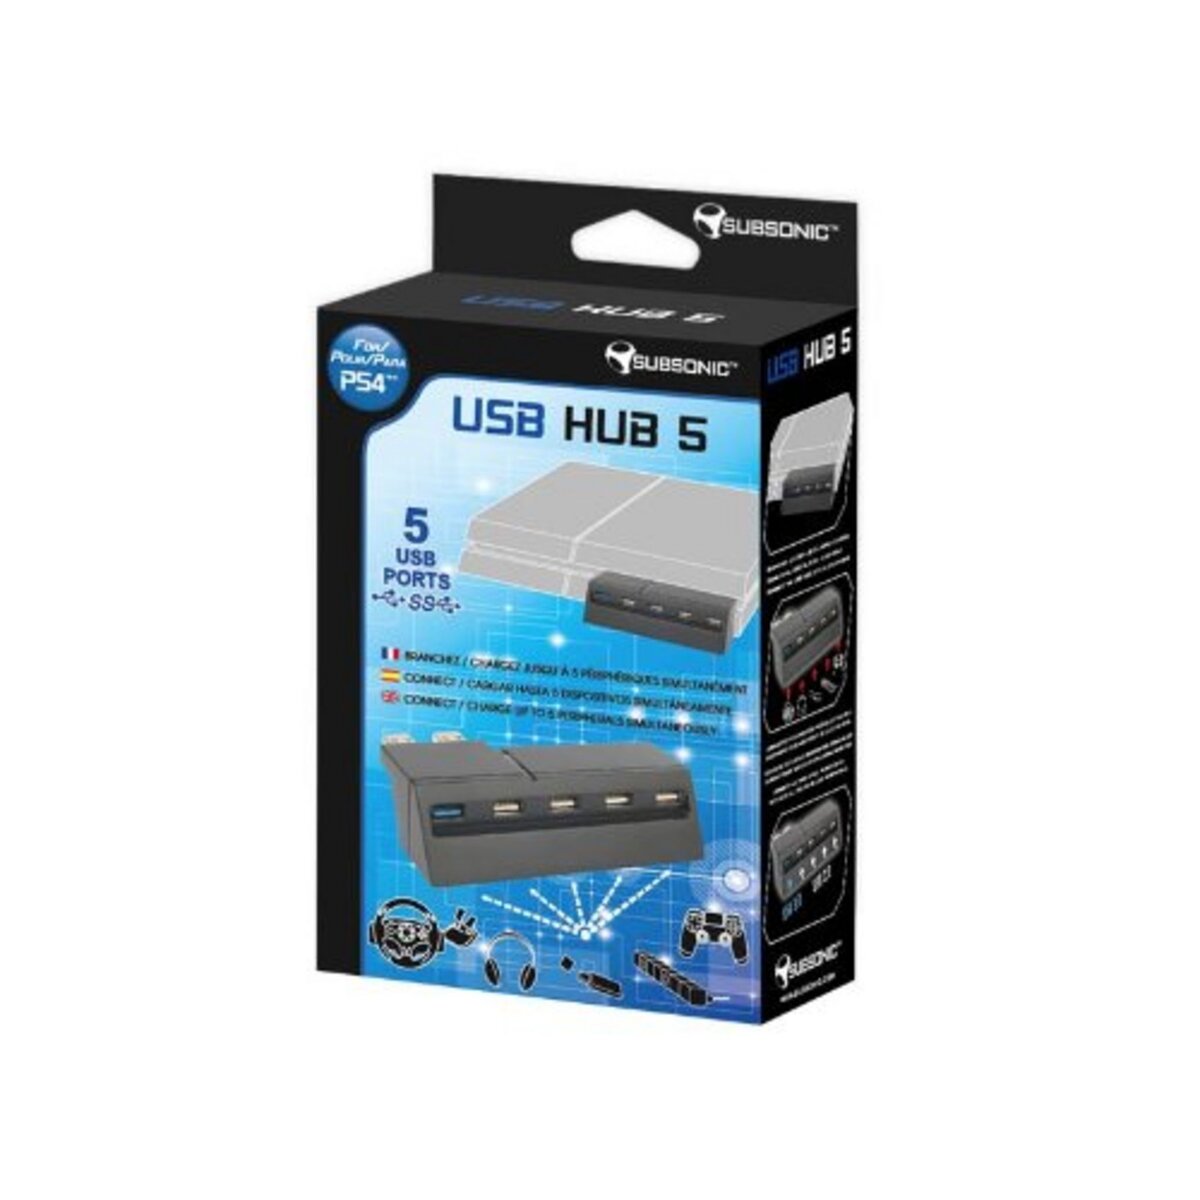 SUBSONIC USB Hub 5 ports pour PS4